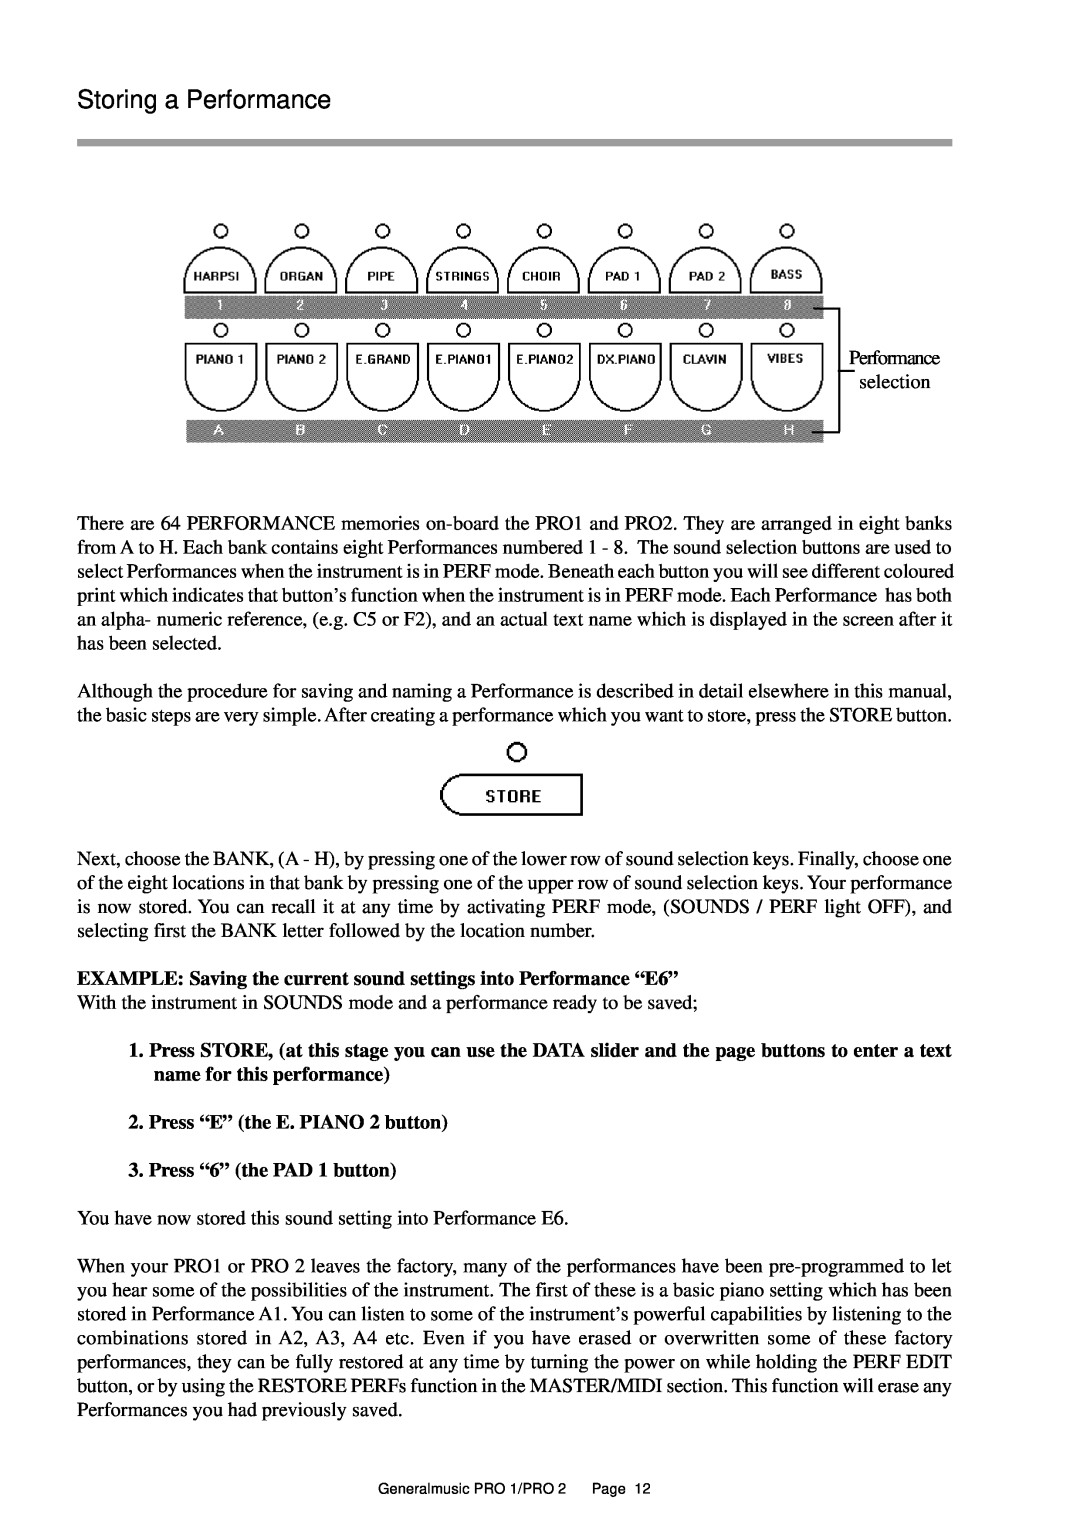 Peavey Pro 1, Pro 2 owner manual Storing a Performance, EXAMPLE Saving the current sound settings into Performance “E6” 